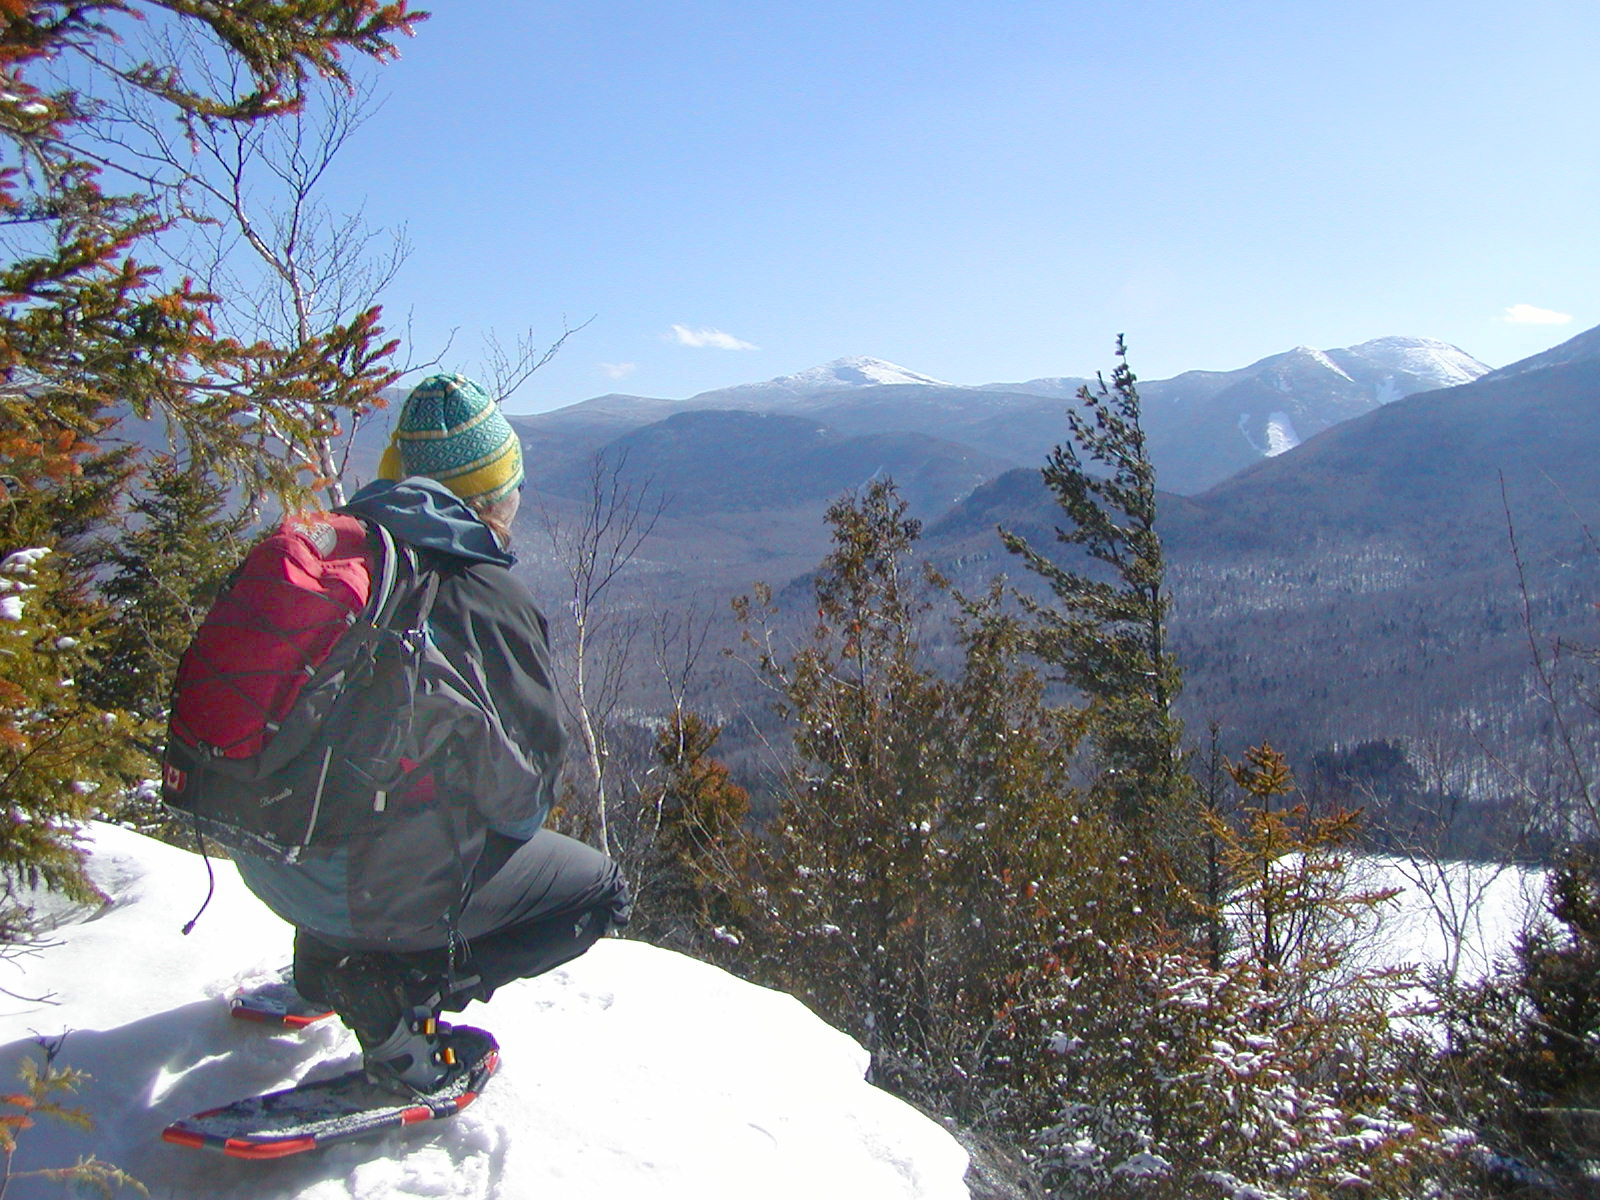 Adirondack winter hiking with snowshoes up Mt Jo